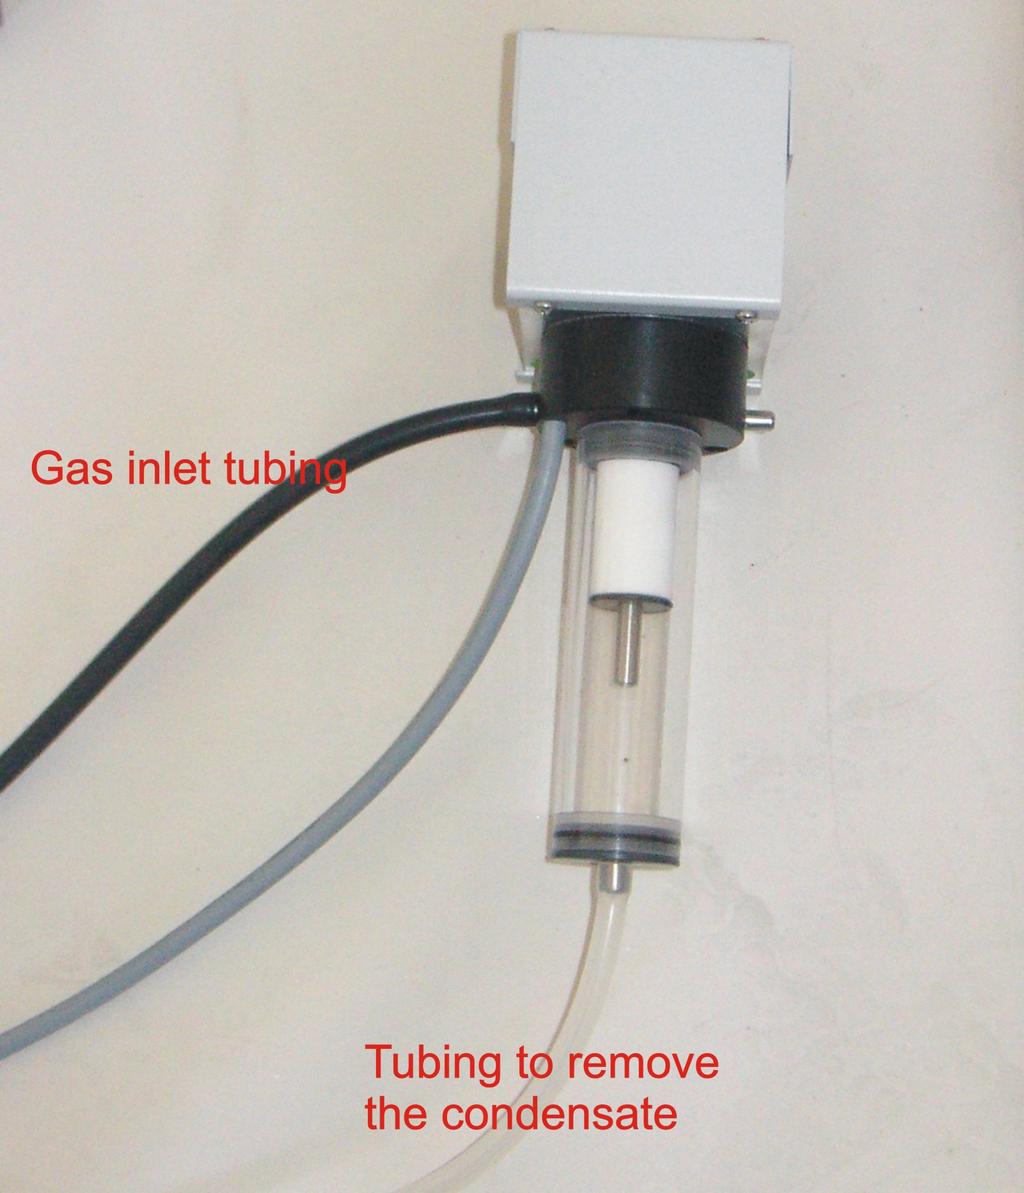 Black silicone tubing is a gas channel.